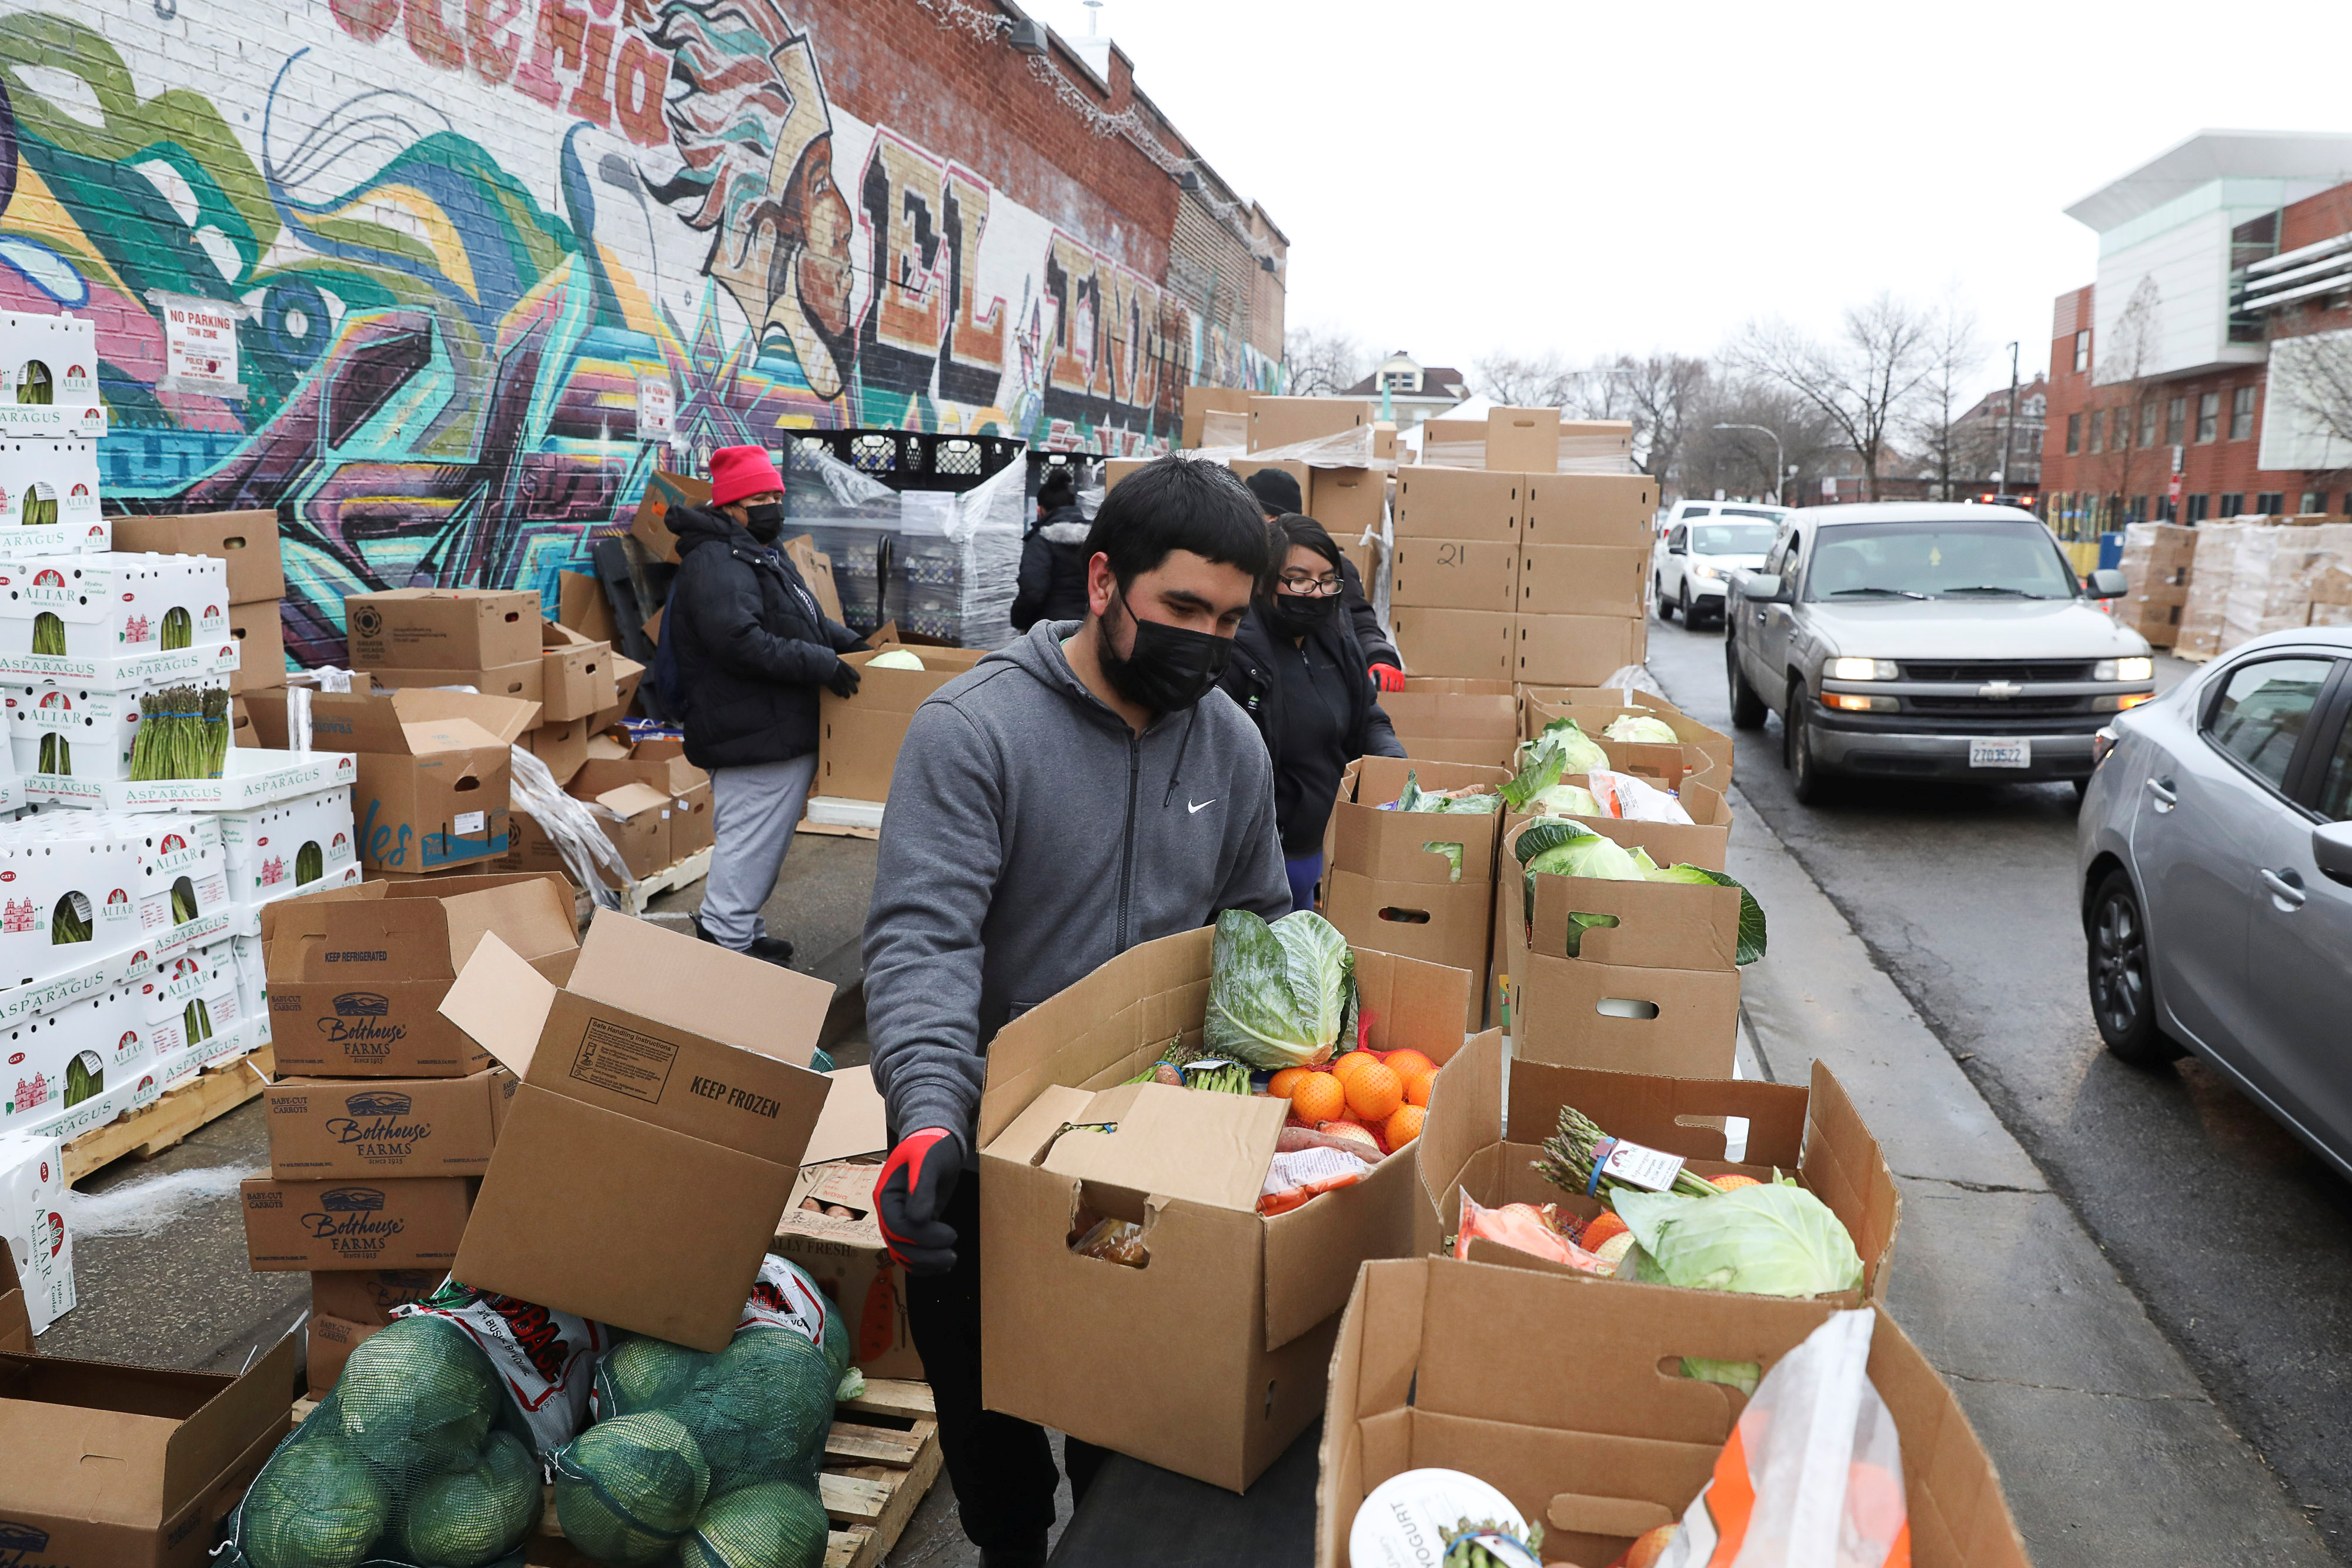 Food is distributed at the nonprofit New Life Centers' food pantry in Chicago